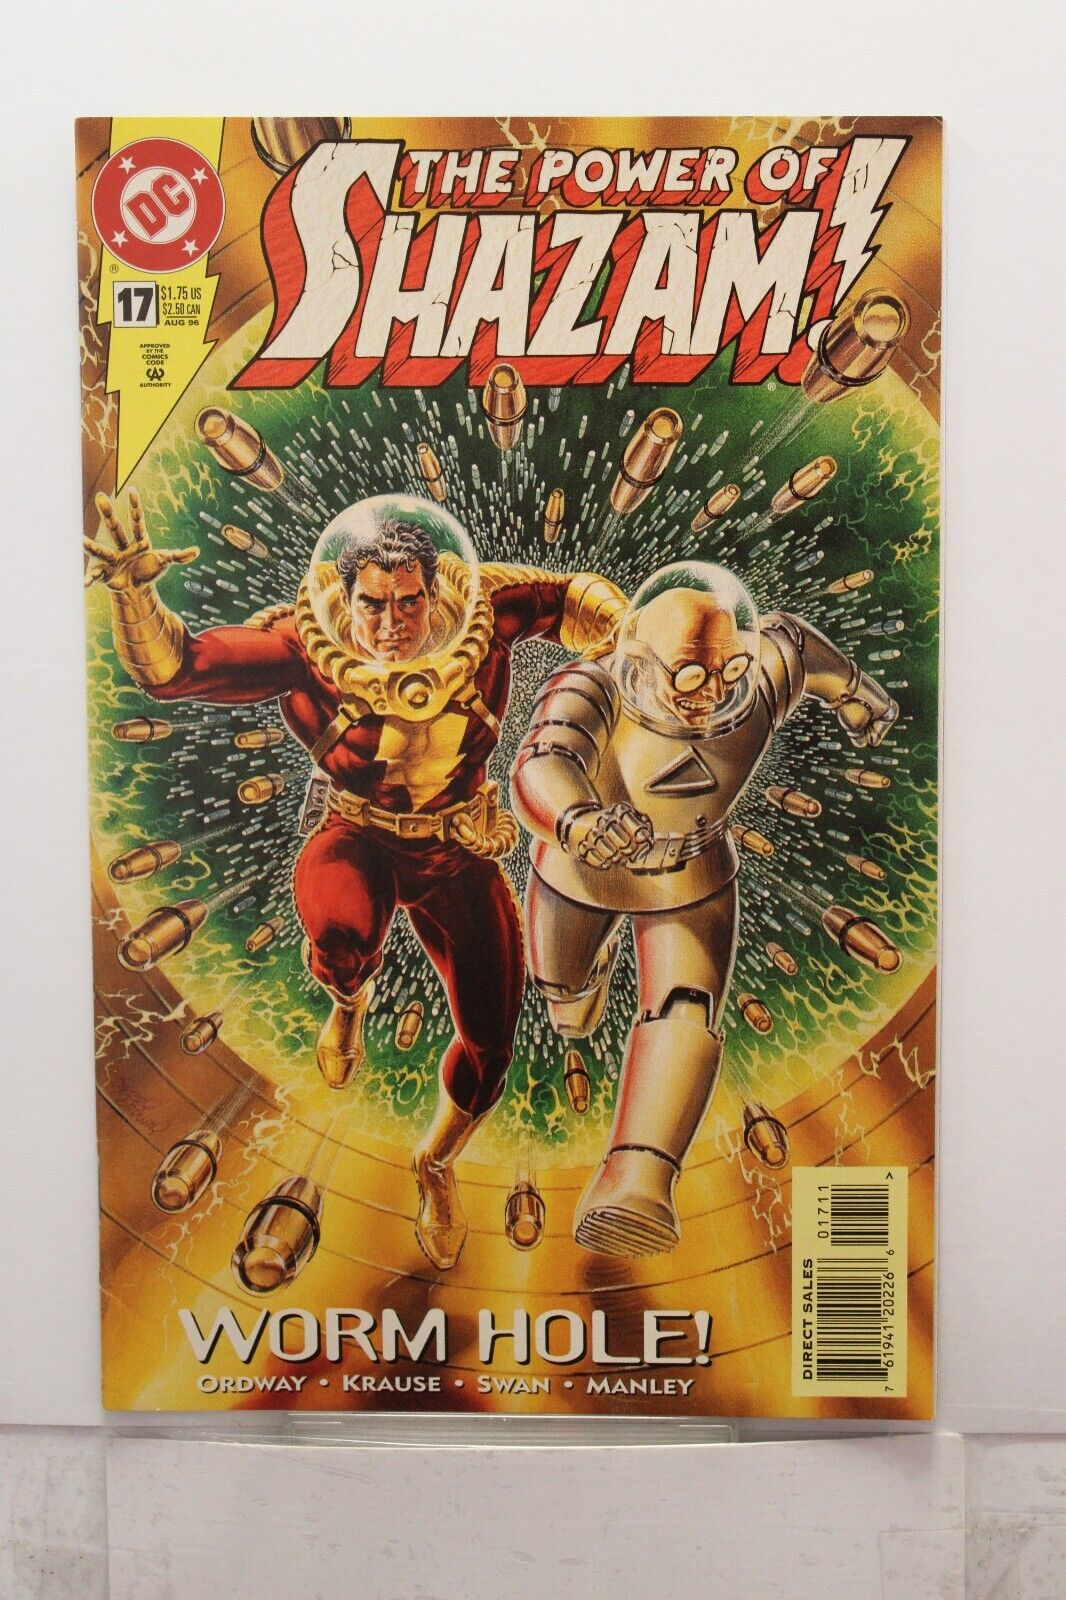 POWER OF SHAZAM #17 (1996) Mr Mind, Jerry Ordway, Peter Krause, DC Comics